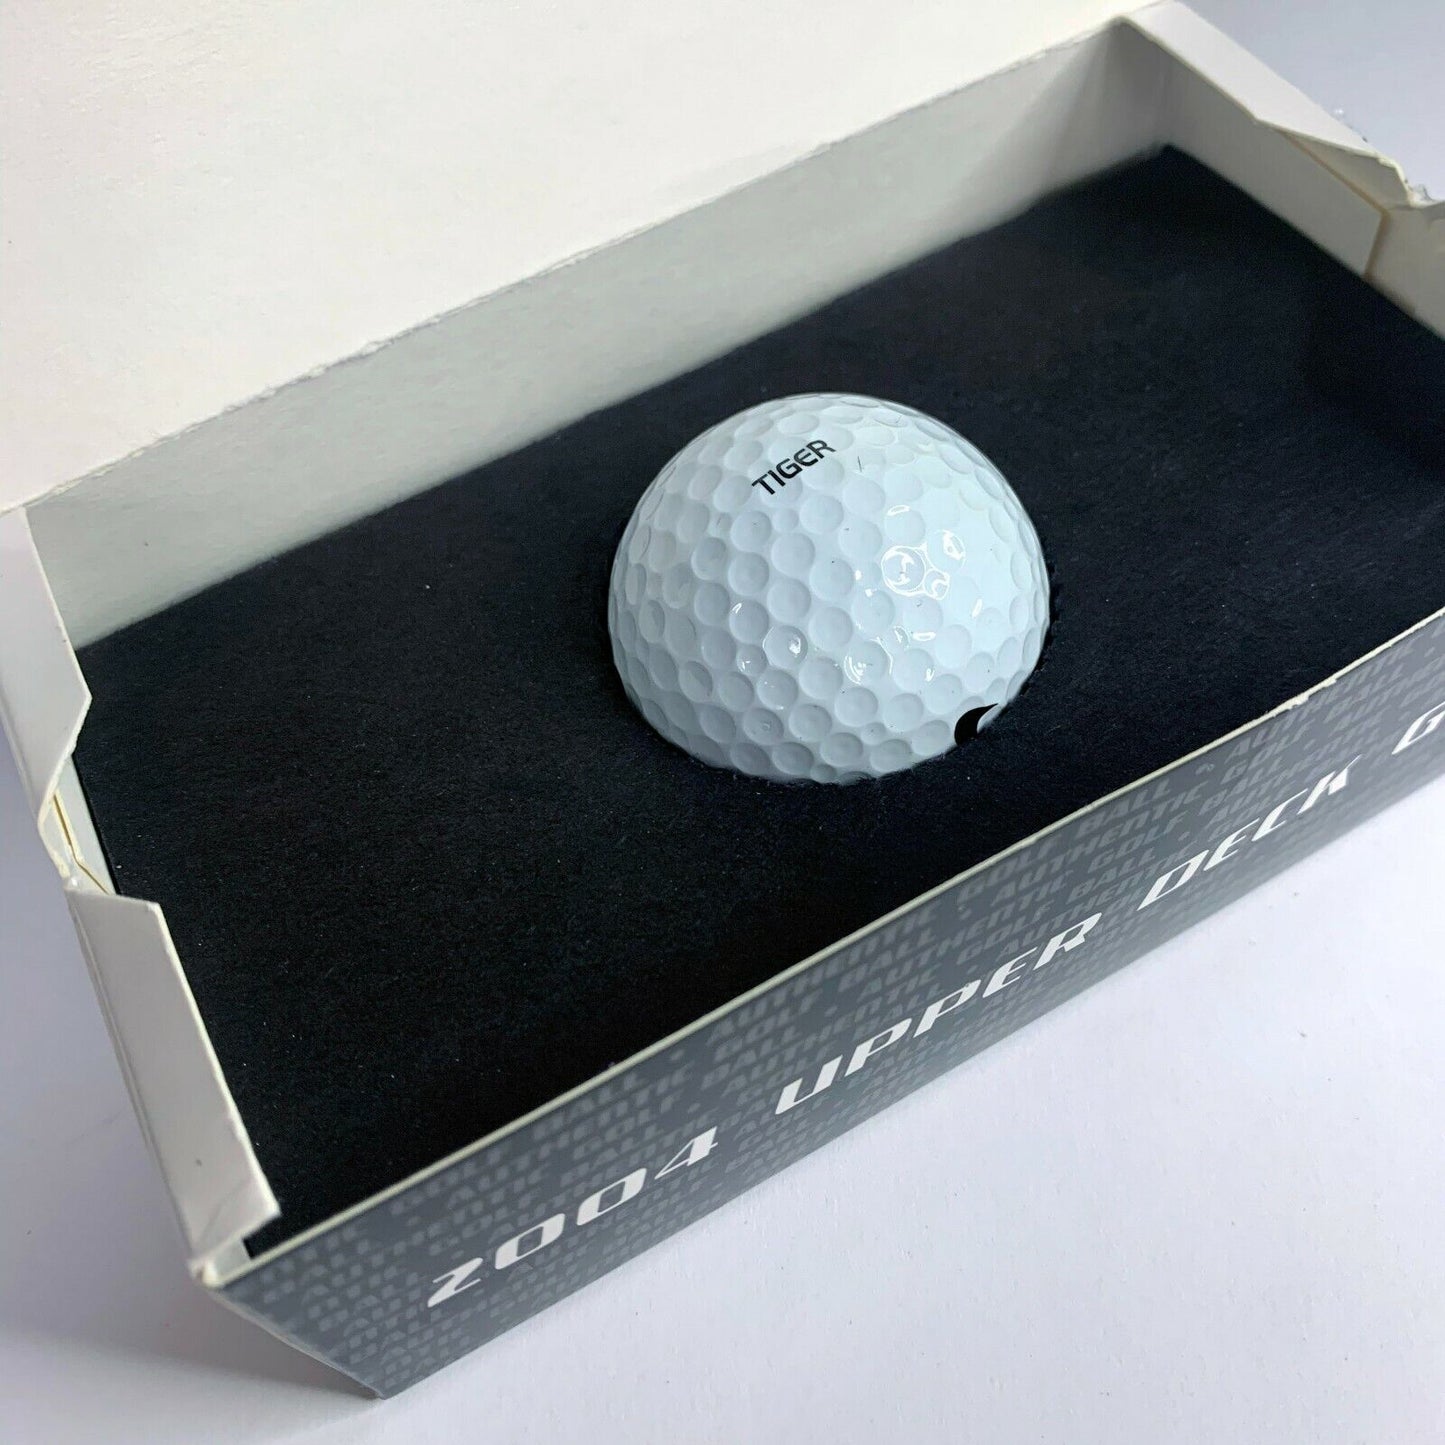 2004 Upper Deck Tiger Woods Authentic Golf Ball with Box - 643-collectibles